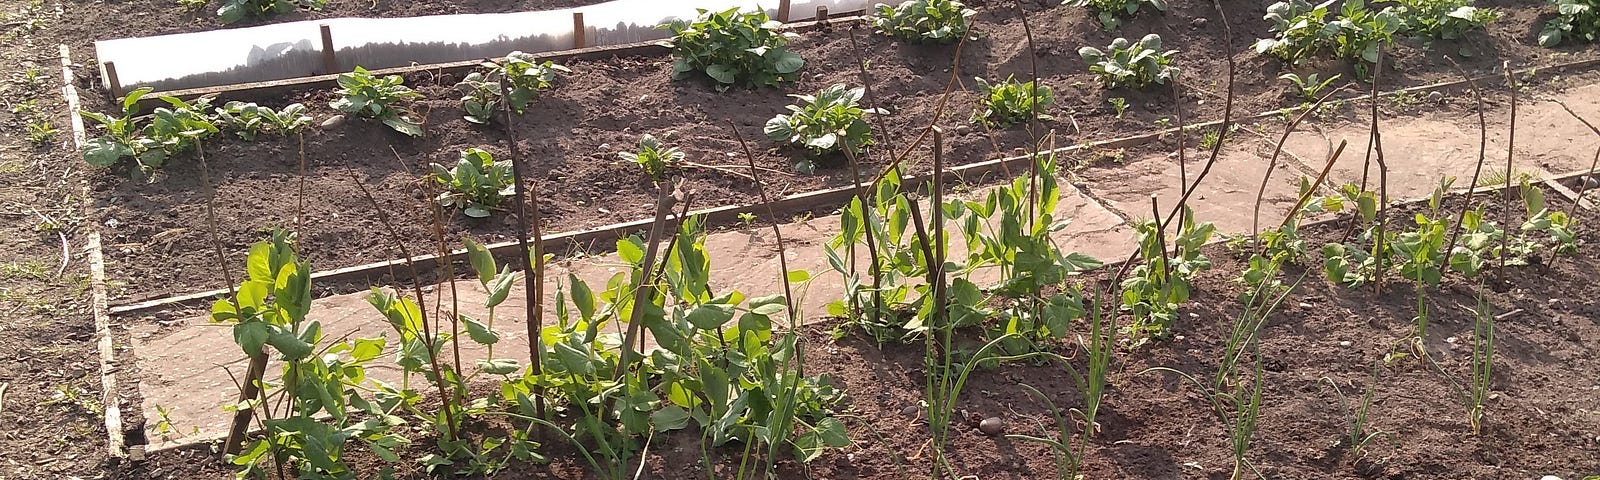 Allotment growing vegetables including beans, peas, potatoes and garlic.